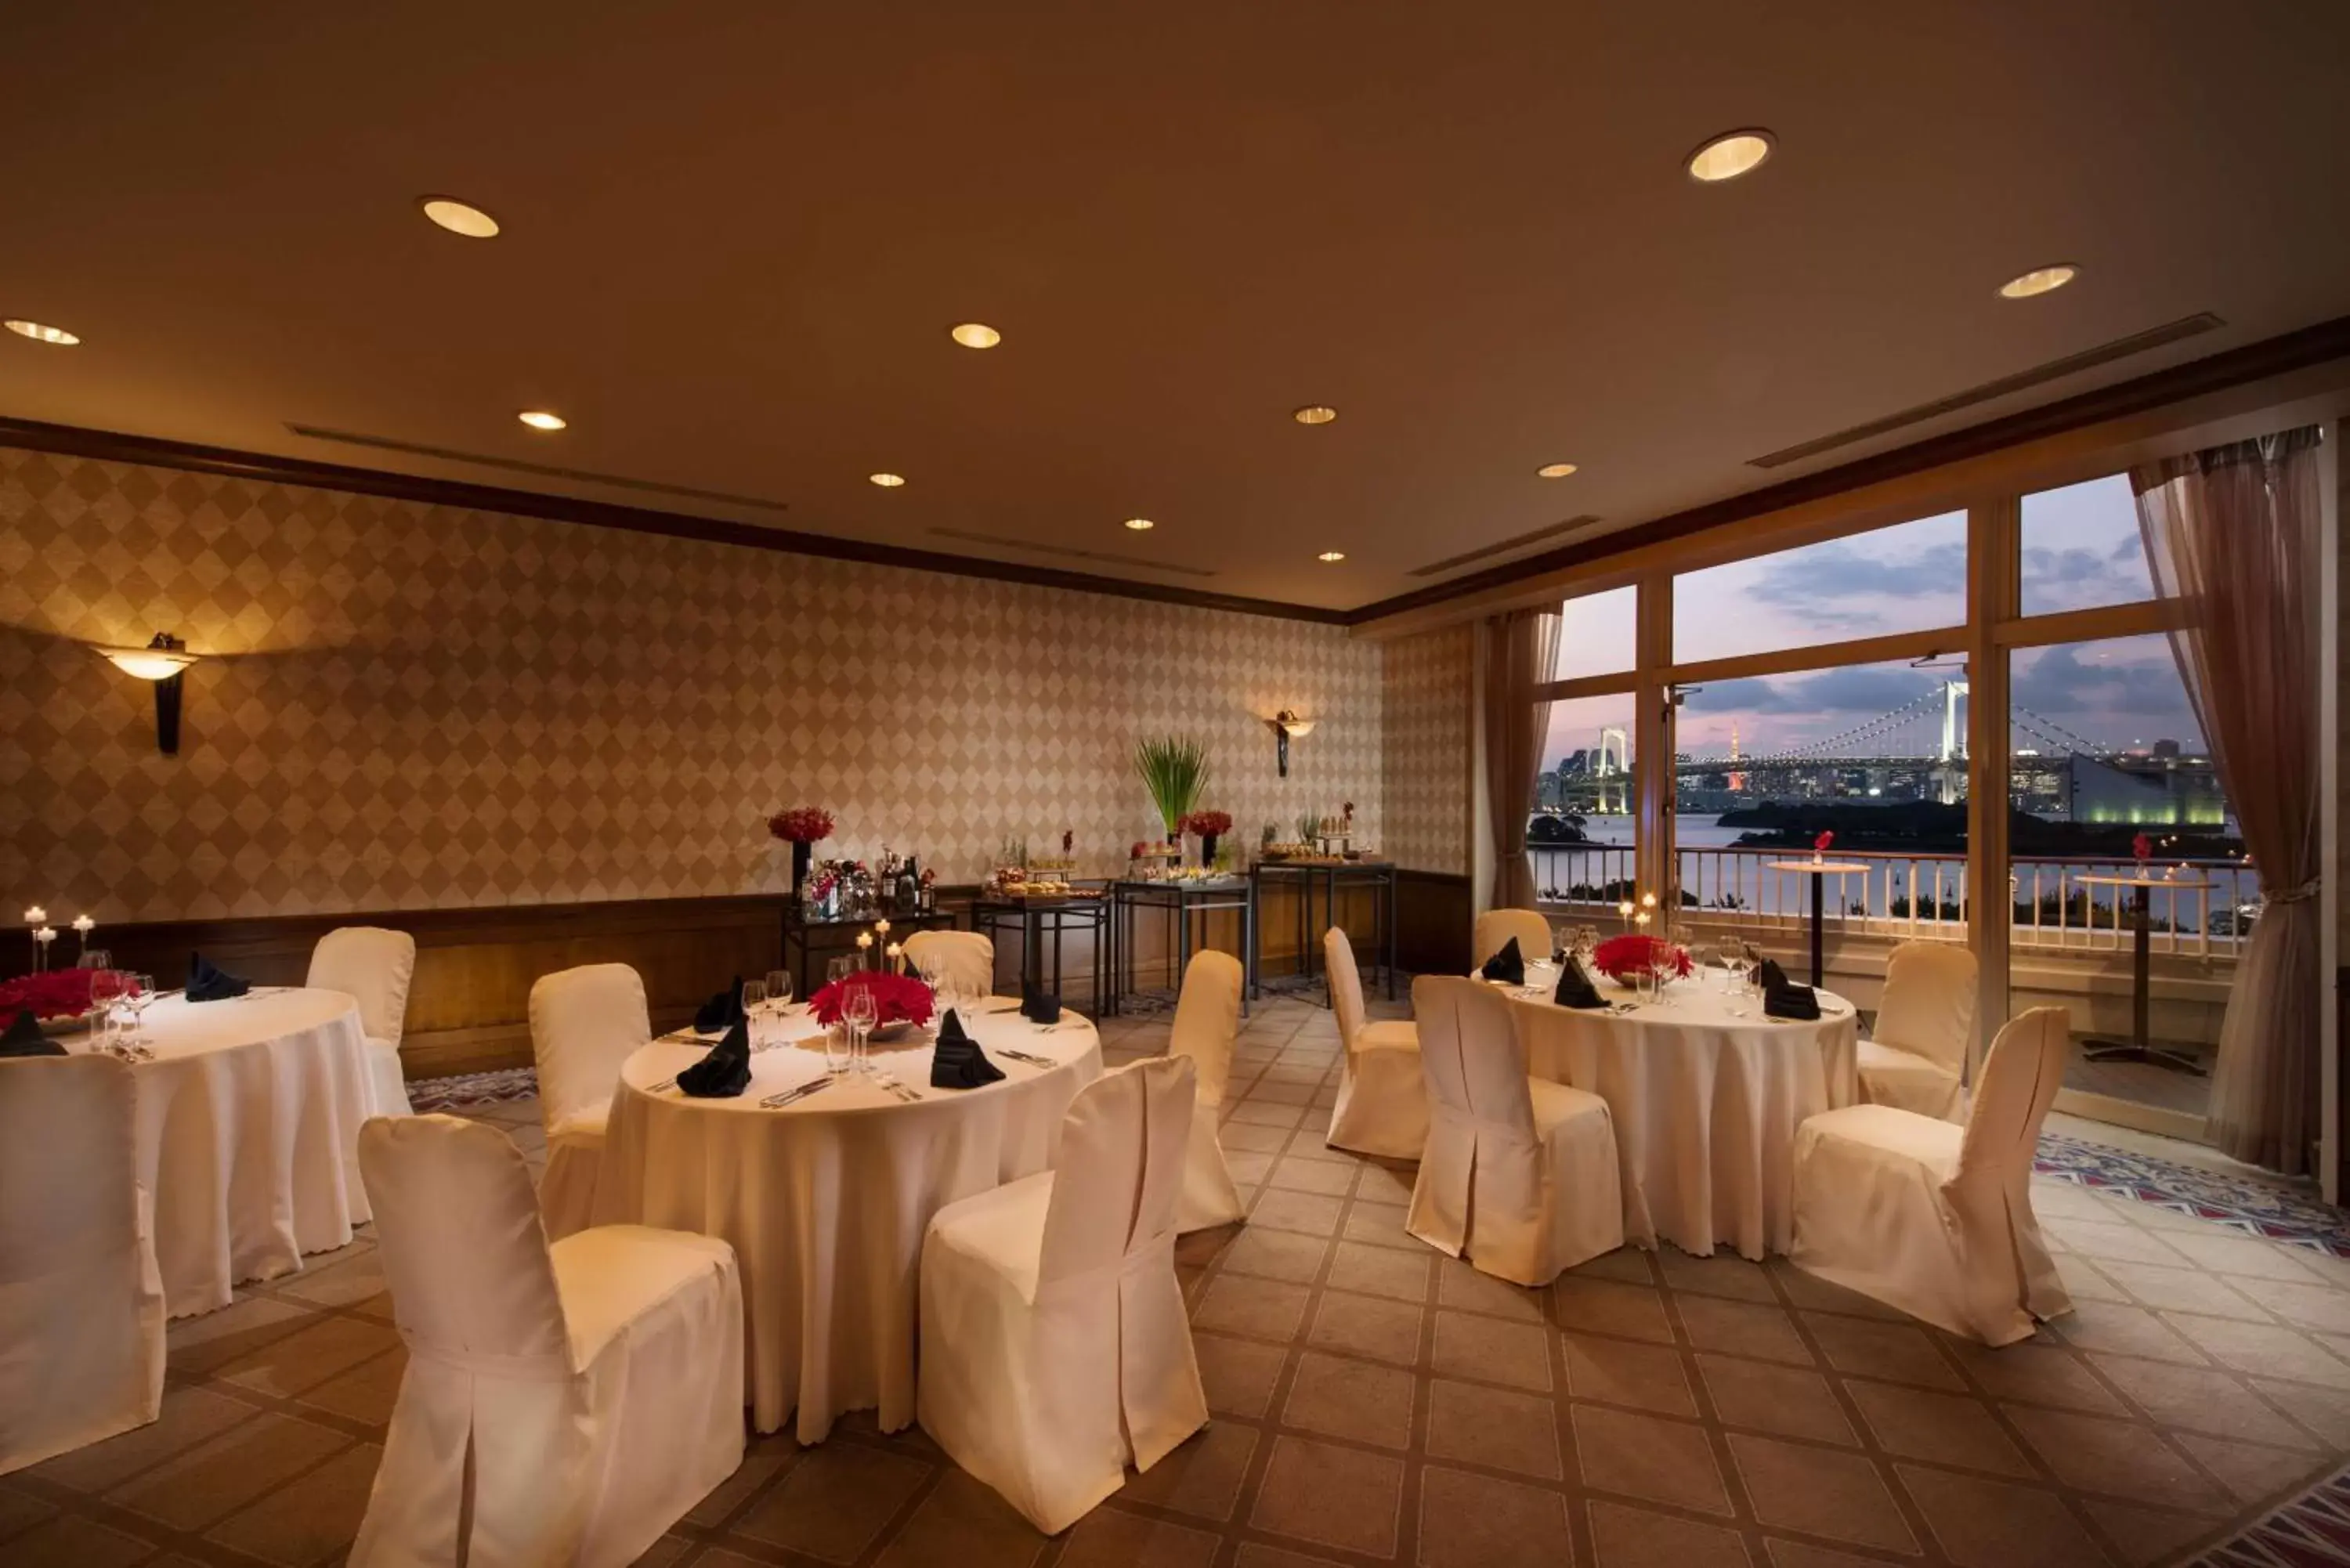 Meeting/conference room, Banquet Facilities in Hilton Tokyo Odaiba